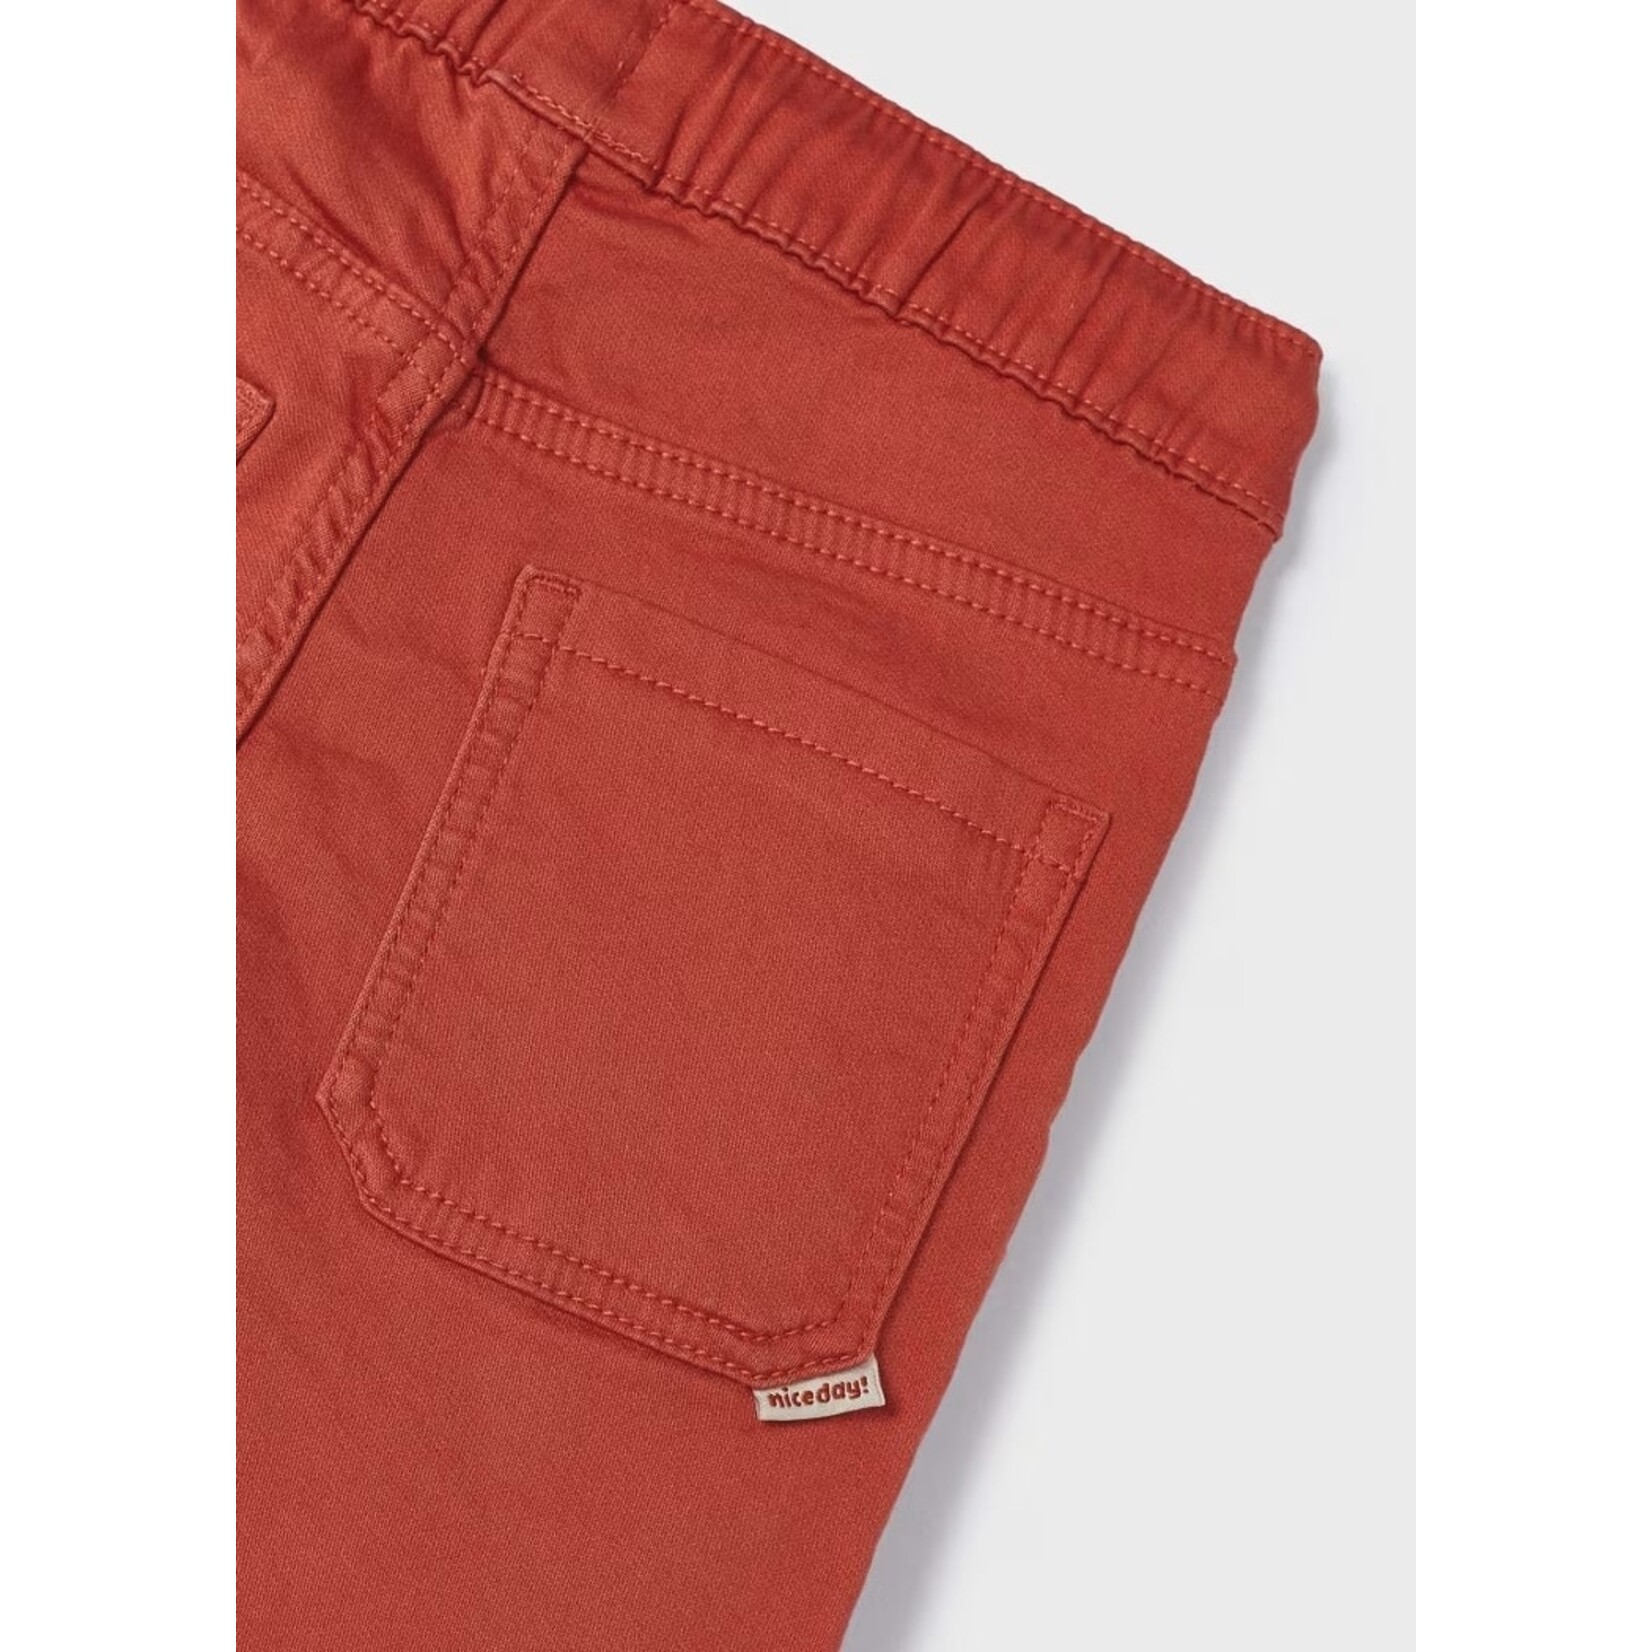 Mayoral MAYORAL - Chilli red twill cotton shorts